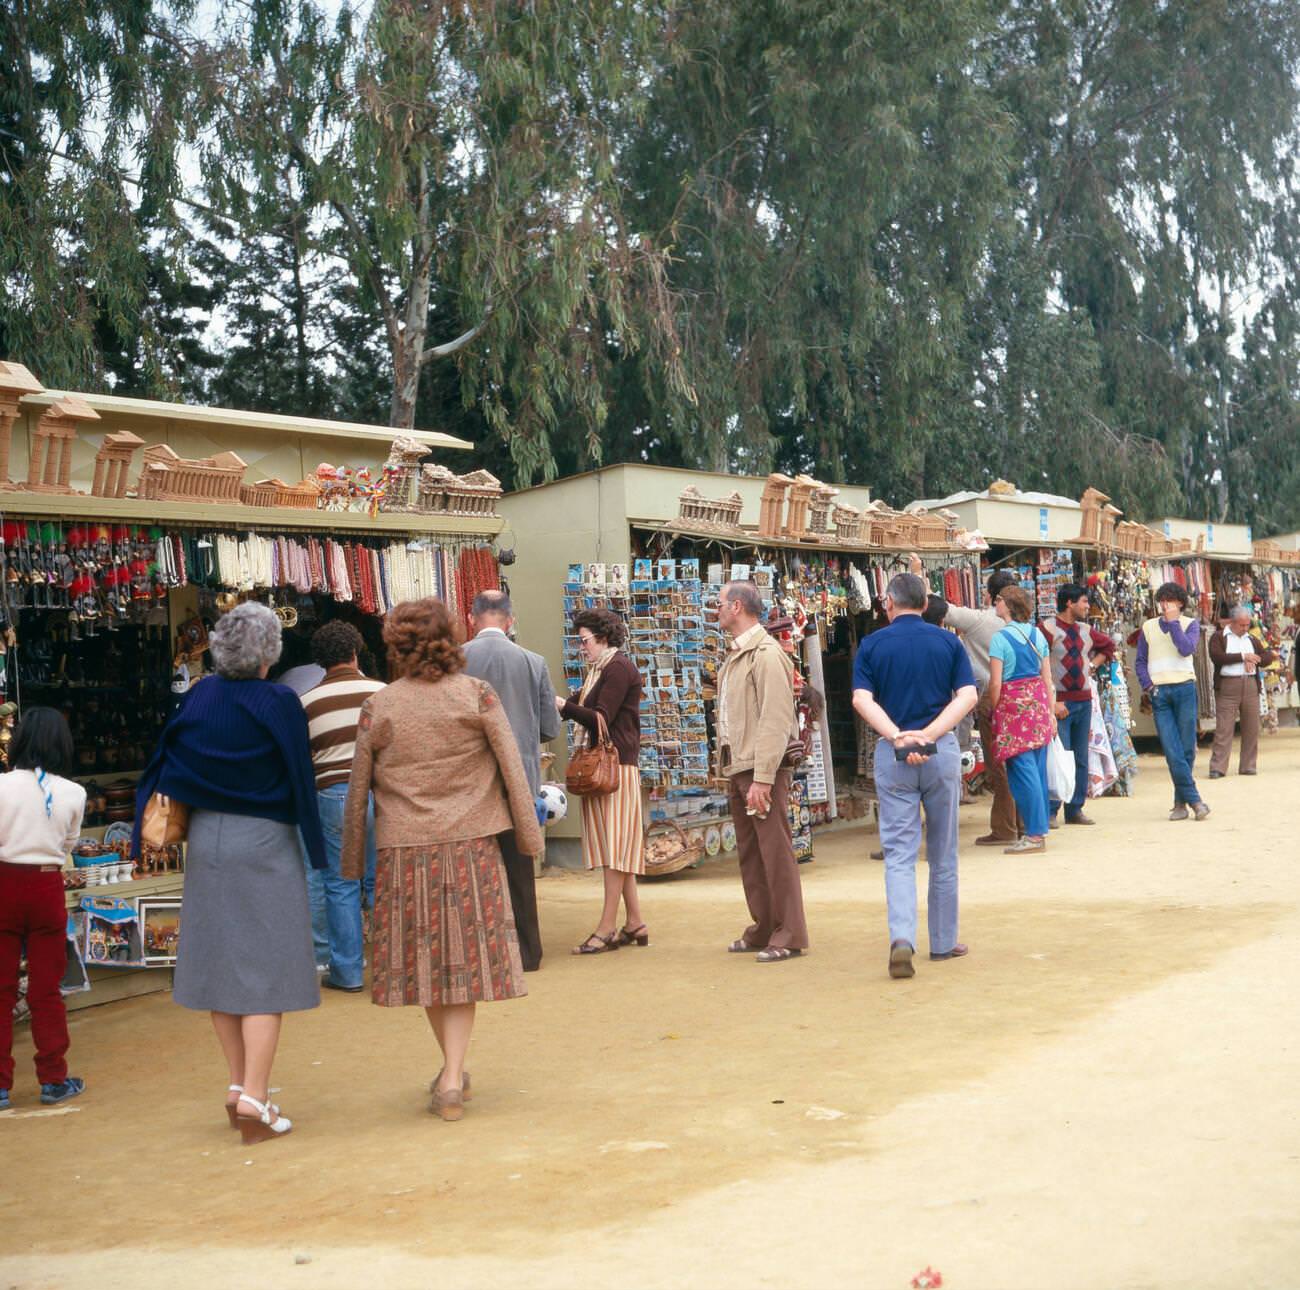 Tourists going shopping in Sicily, Italy, in the 1970s.